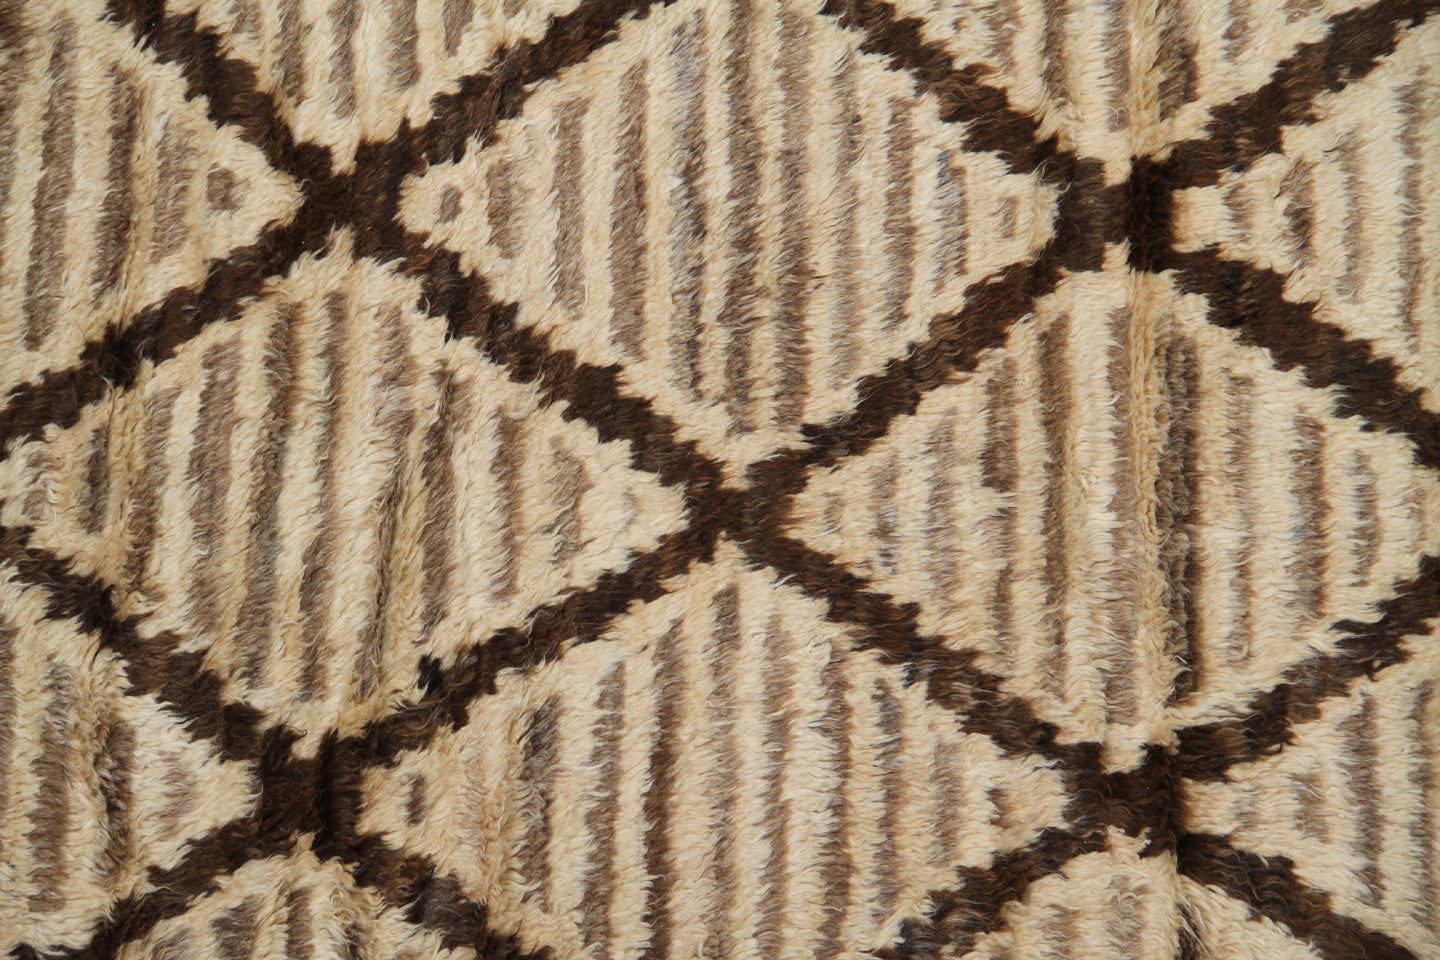 12'x9' Moroccan Style Camel Brown Shaggy Rug